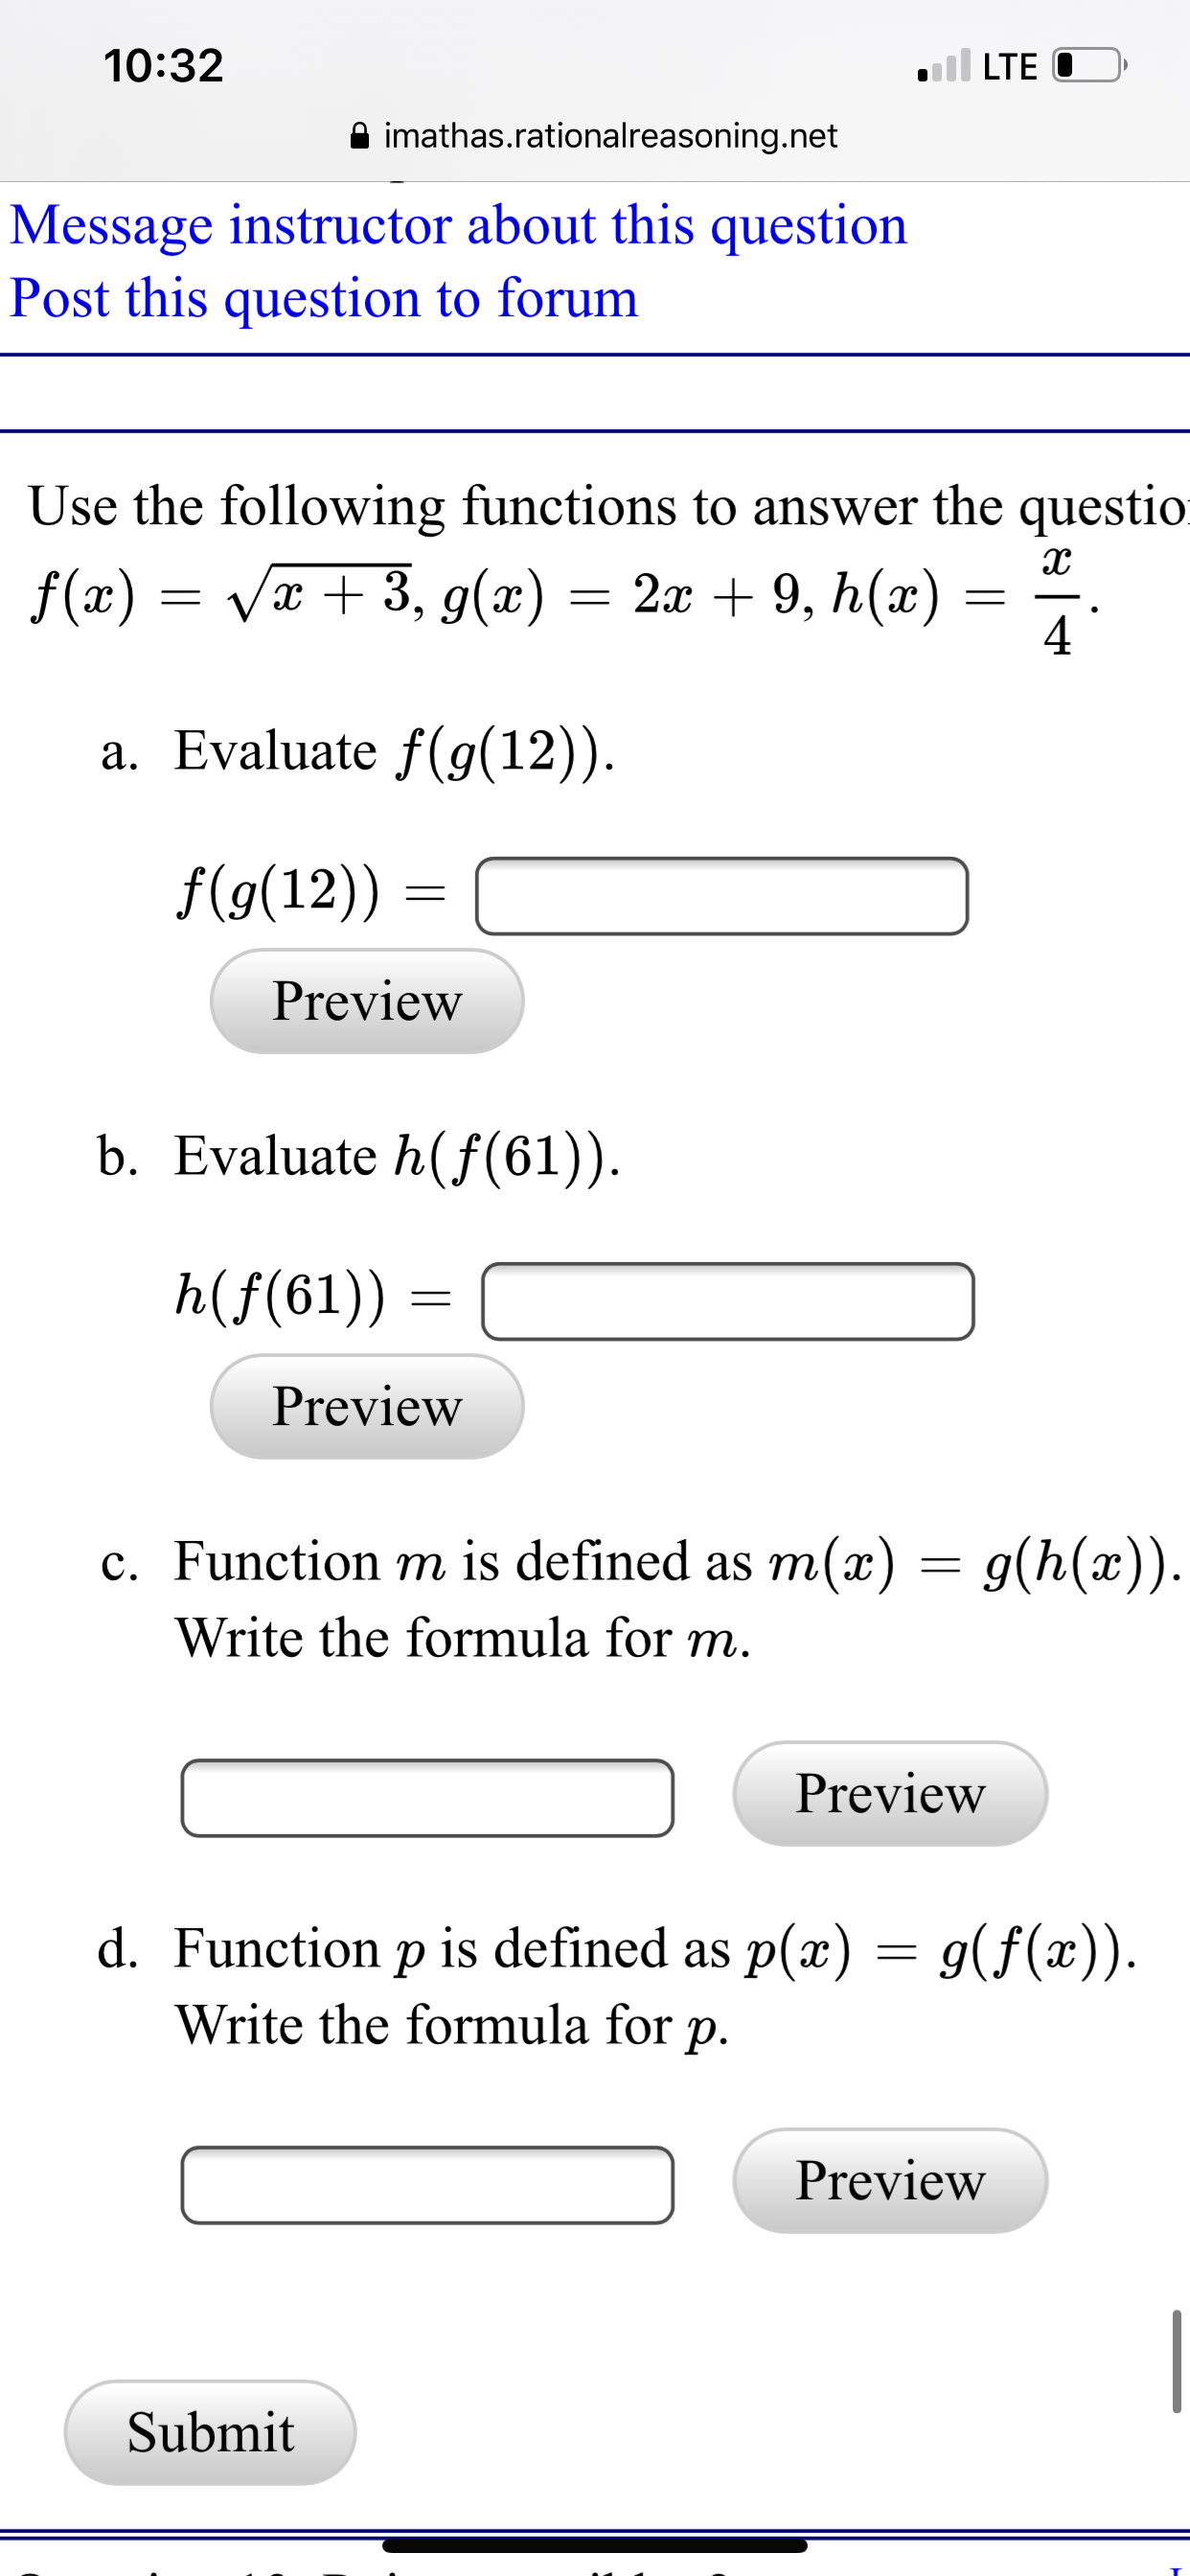 Use the following functions to answer the questio
= vx + 3, g(x) = 2x + 9, h(x)
4
a. Evaluate f(g(12)).
f(g(12)) =
Preview
b. Evaluate h(f(61)).
h(f(61))
Preview
c. Function m is defined as m(x) = g(h(x)).
Write the formula for m.
Preview
d. Function p is defined as p(x) = g(f(x)).
Write the formula for
р.
Preview
